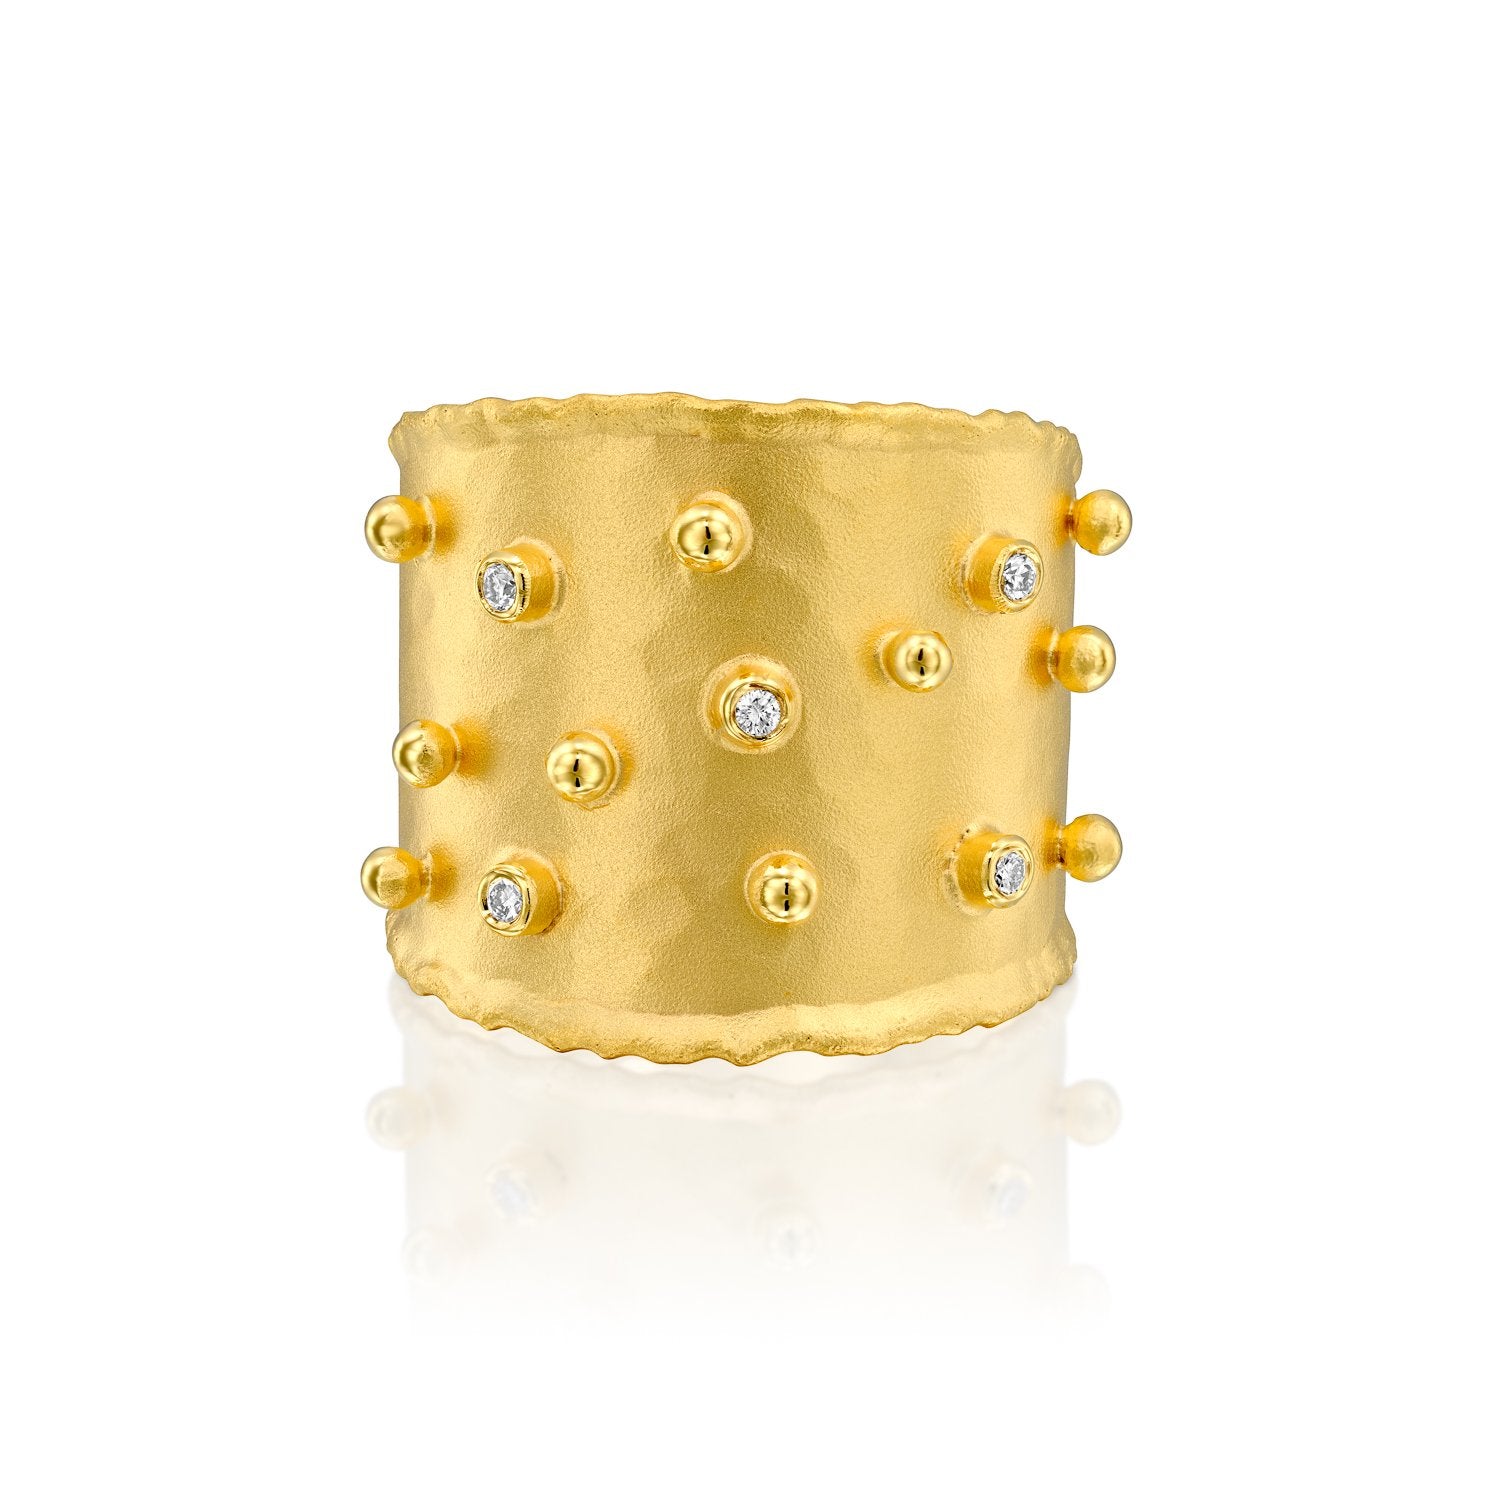 2969 - 14kt yellow hammered texture band ring with shiny gold dots and .05cttw white diamonds.